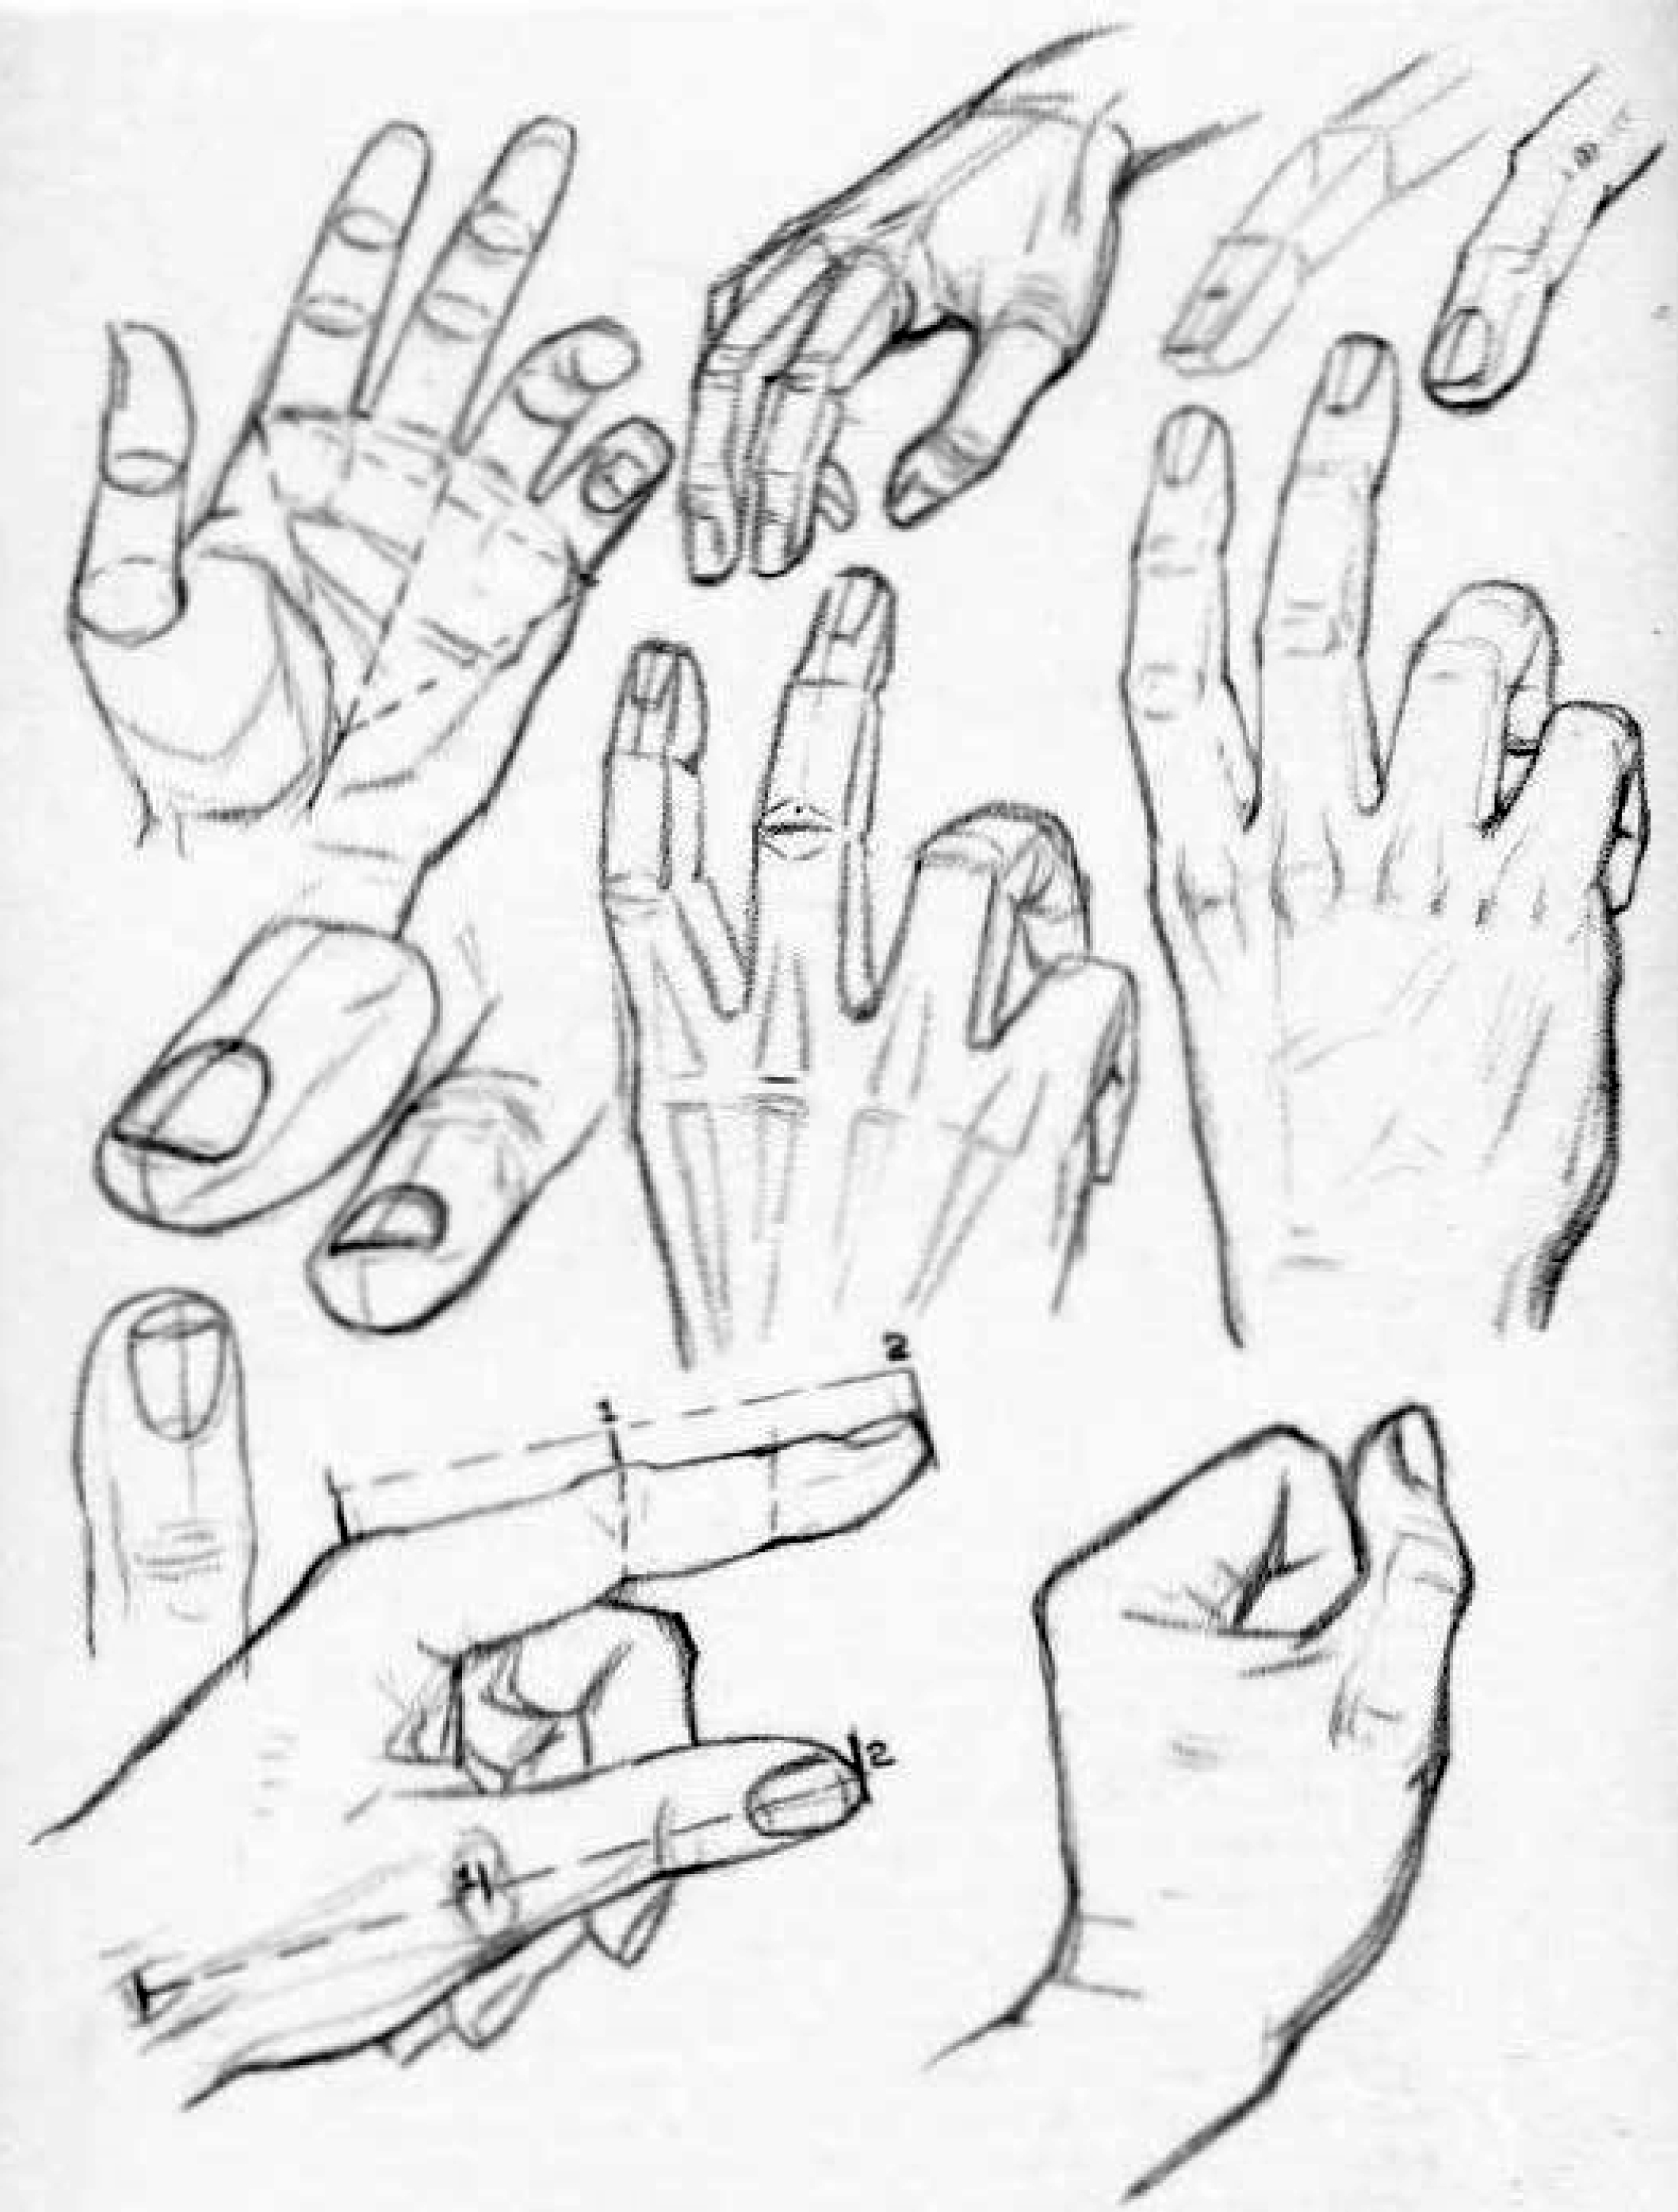 Constructing and Drawing Hands in the Right Way